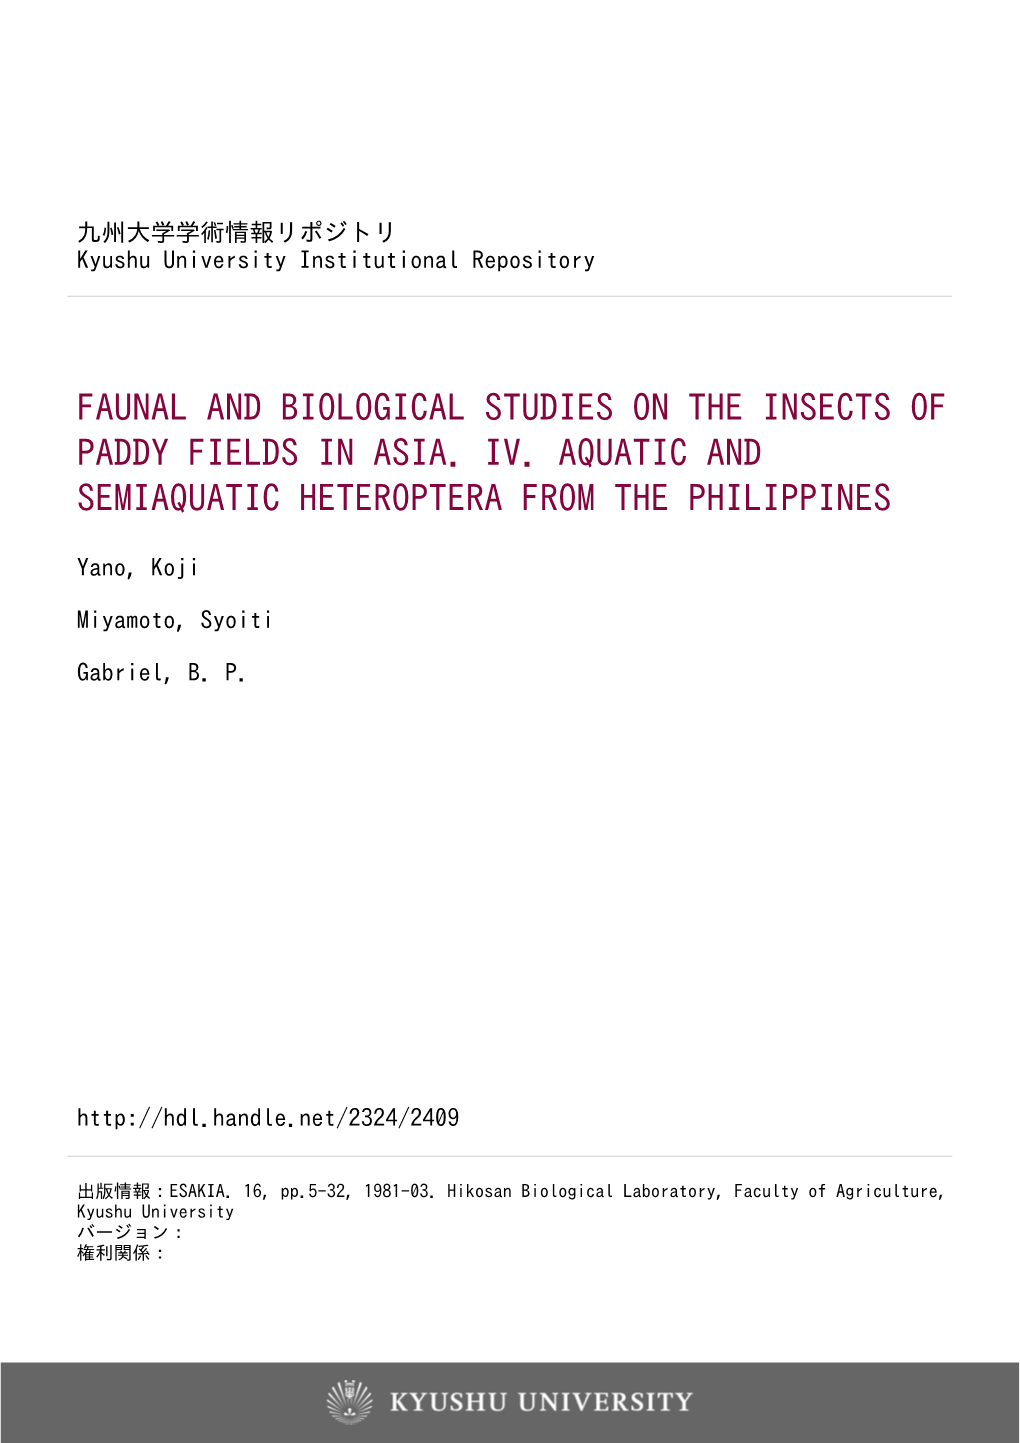 Faunal and Biological Studies on the Insects of Paddy Fields in Asia